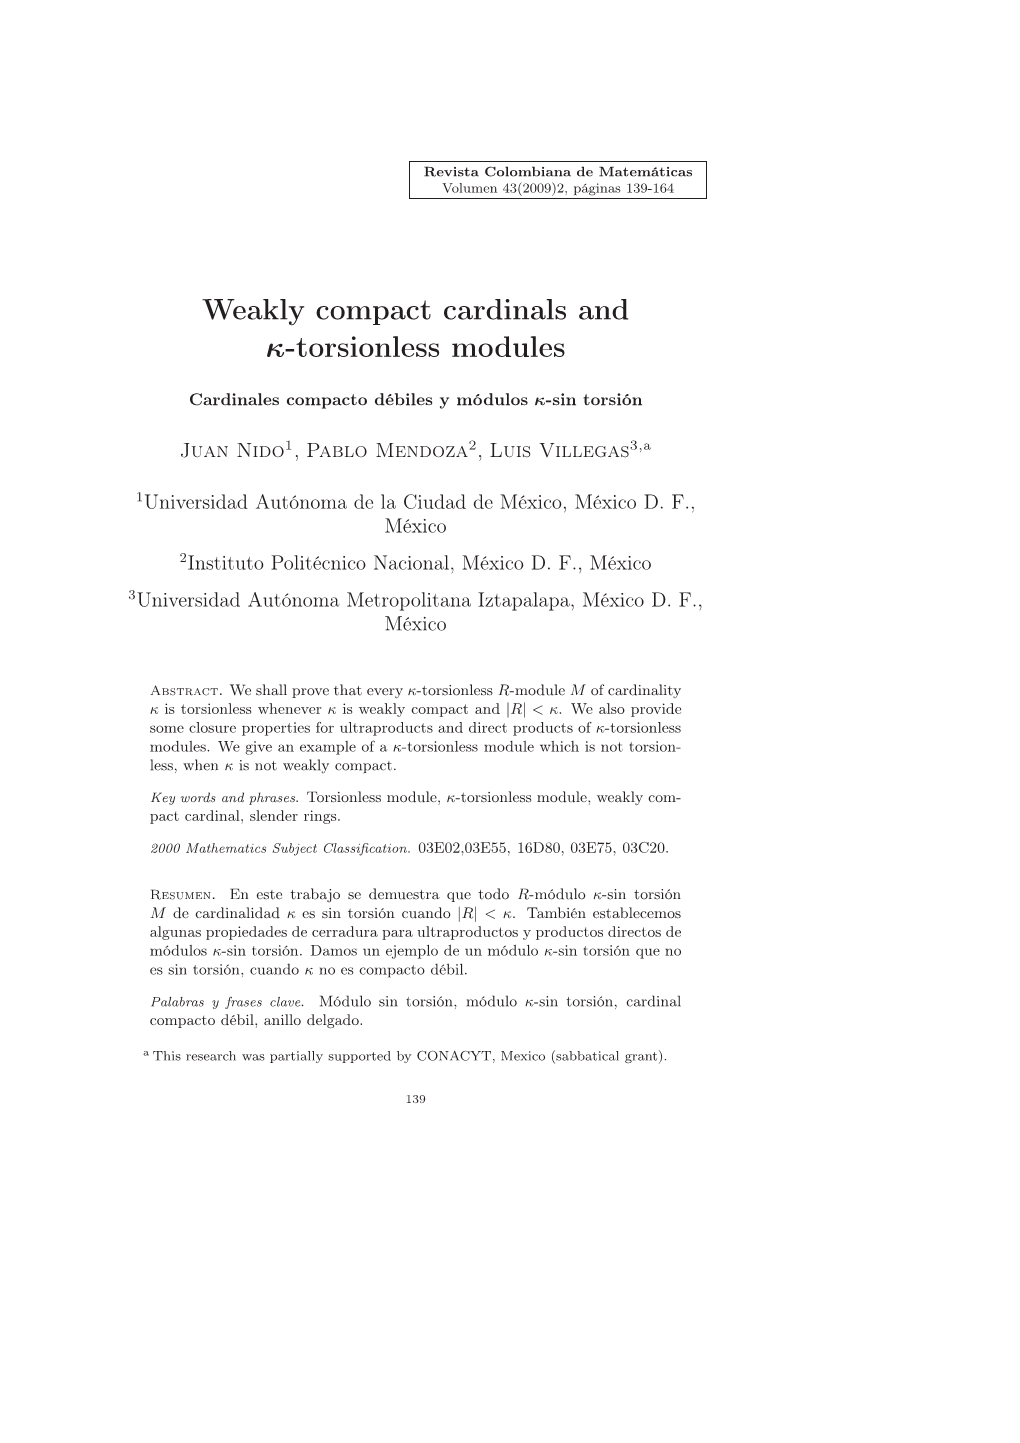 Weakly Compact Cardinals and Κ-Torsionless Modules